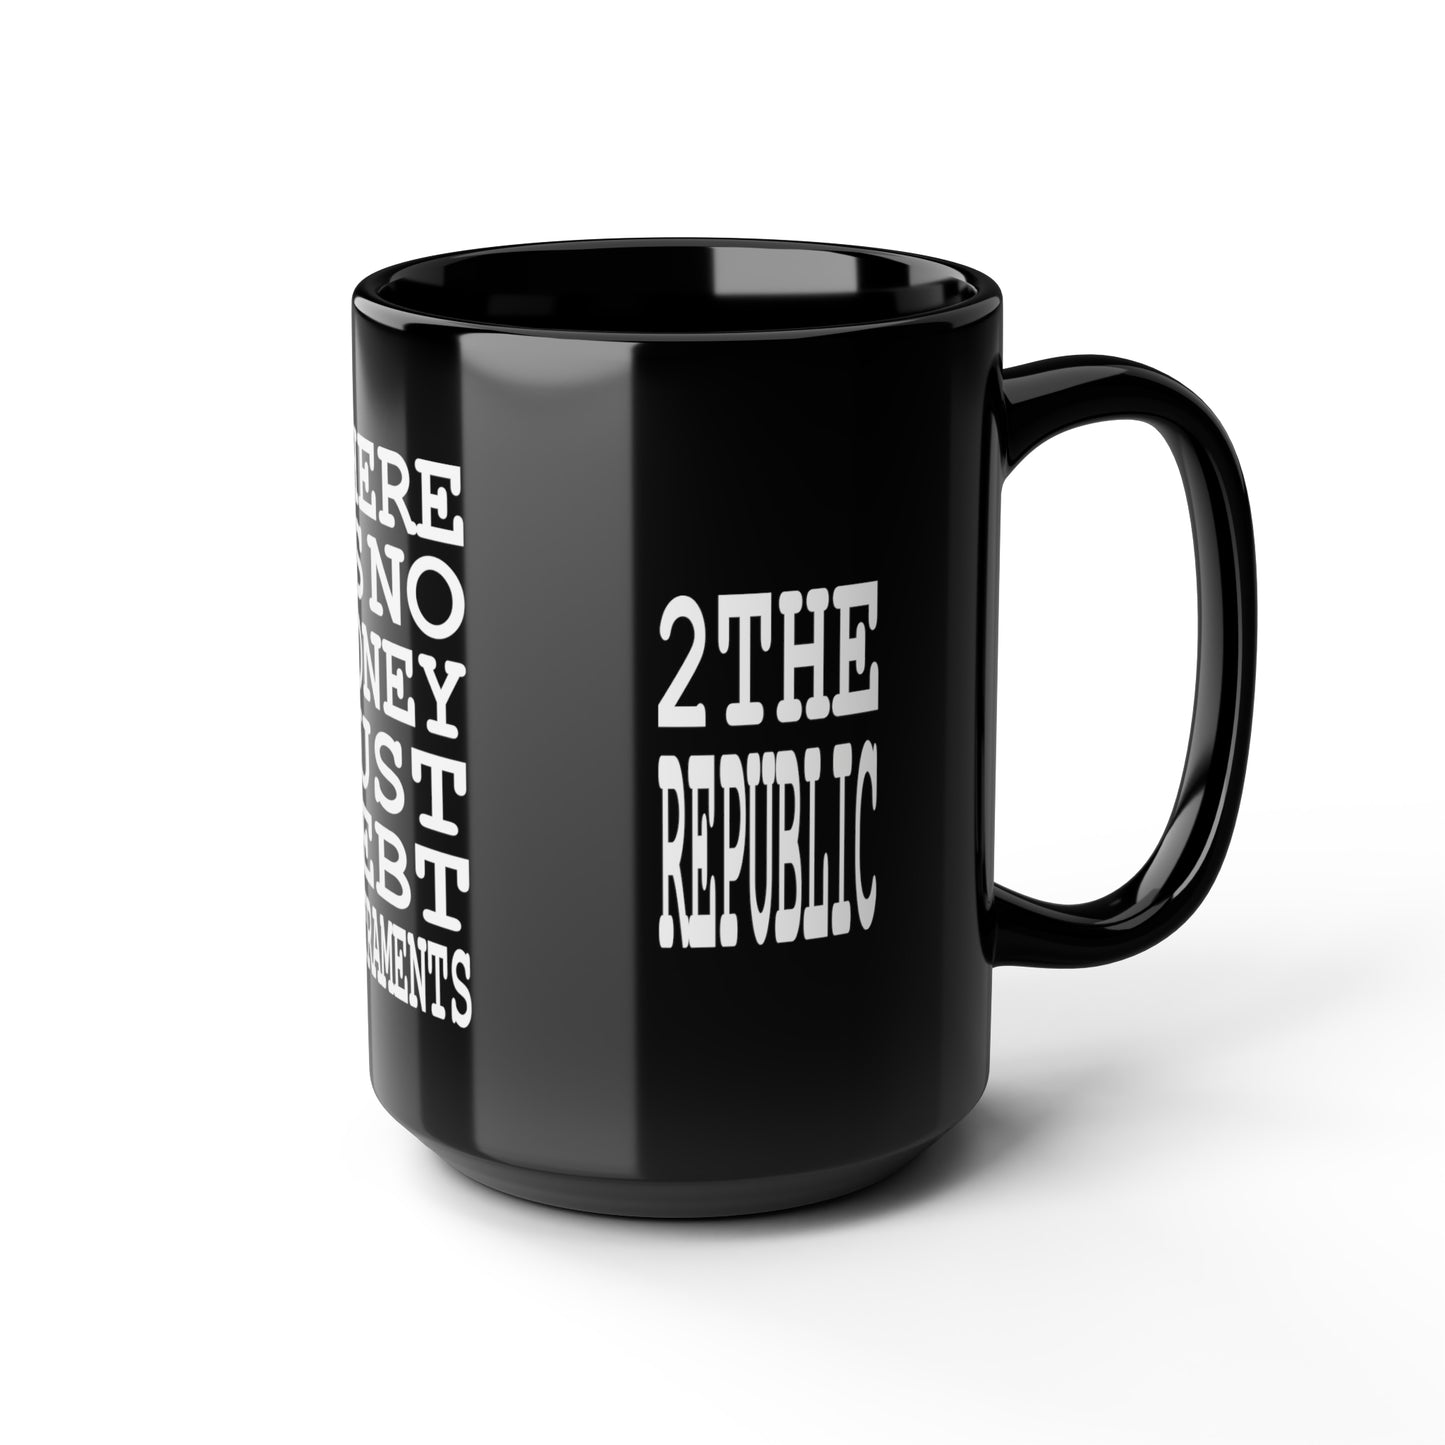 UNO 2THEREPUBLIC THERE IS NO MONEY IN THIS CORPORATE DEMOCRACY Black Mug, 15oz